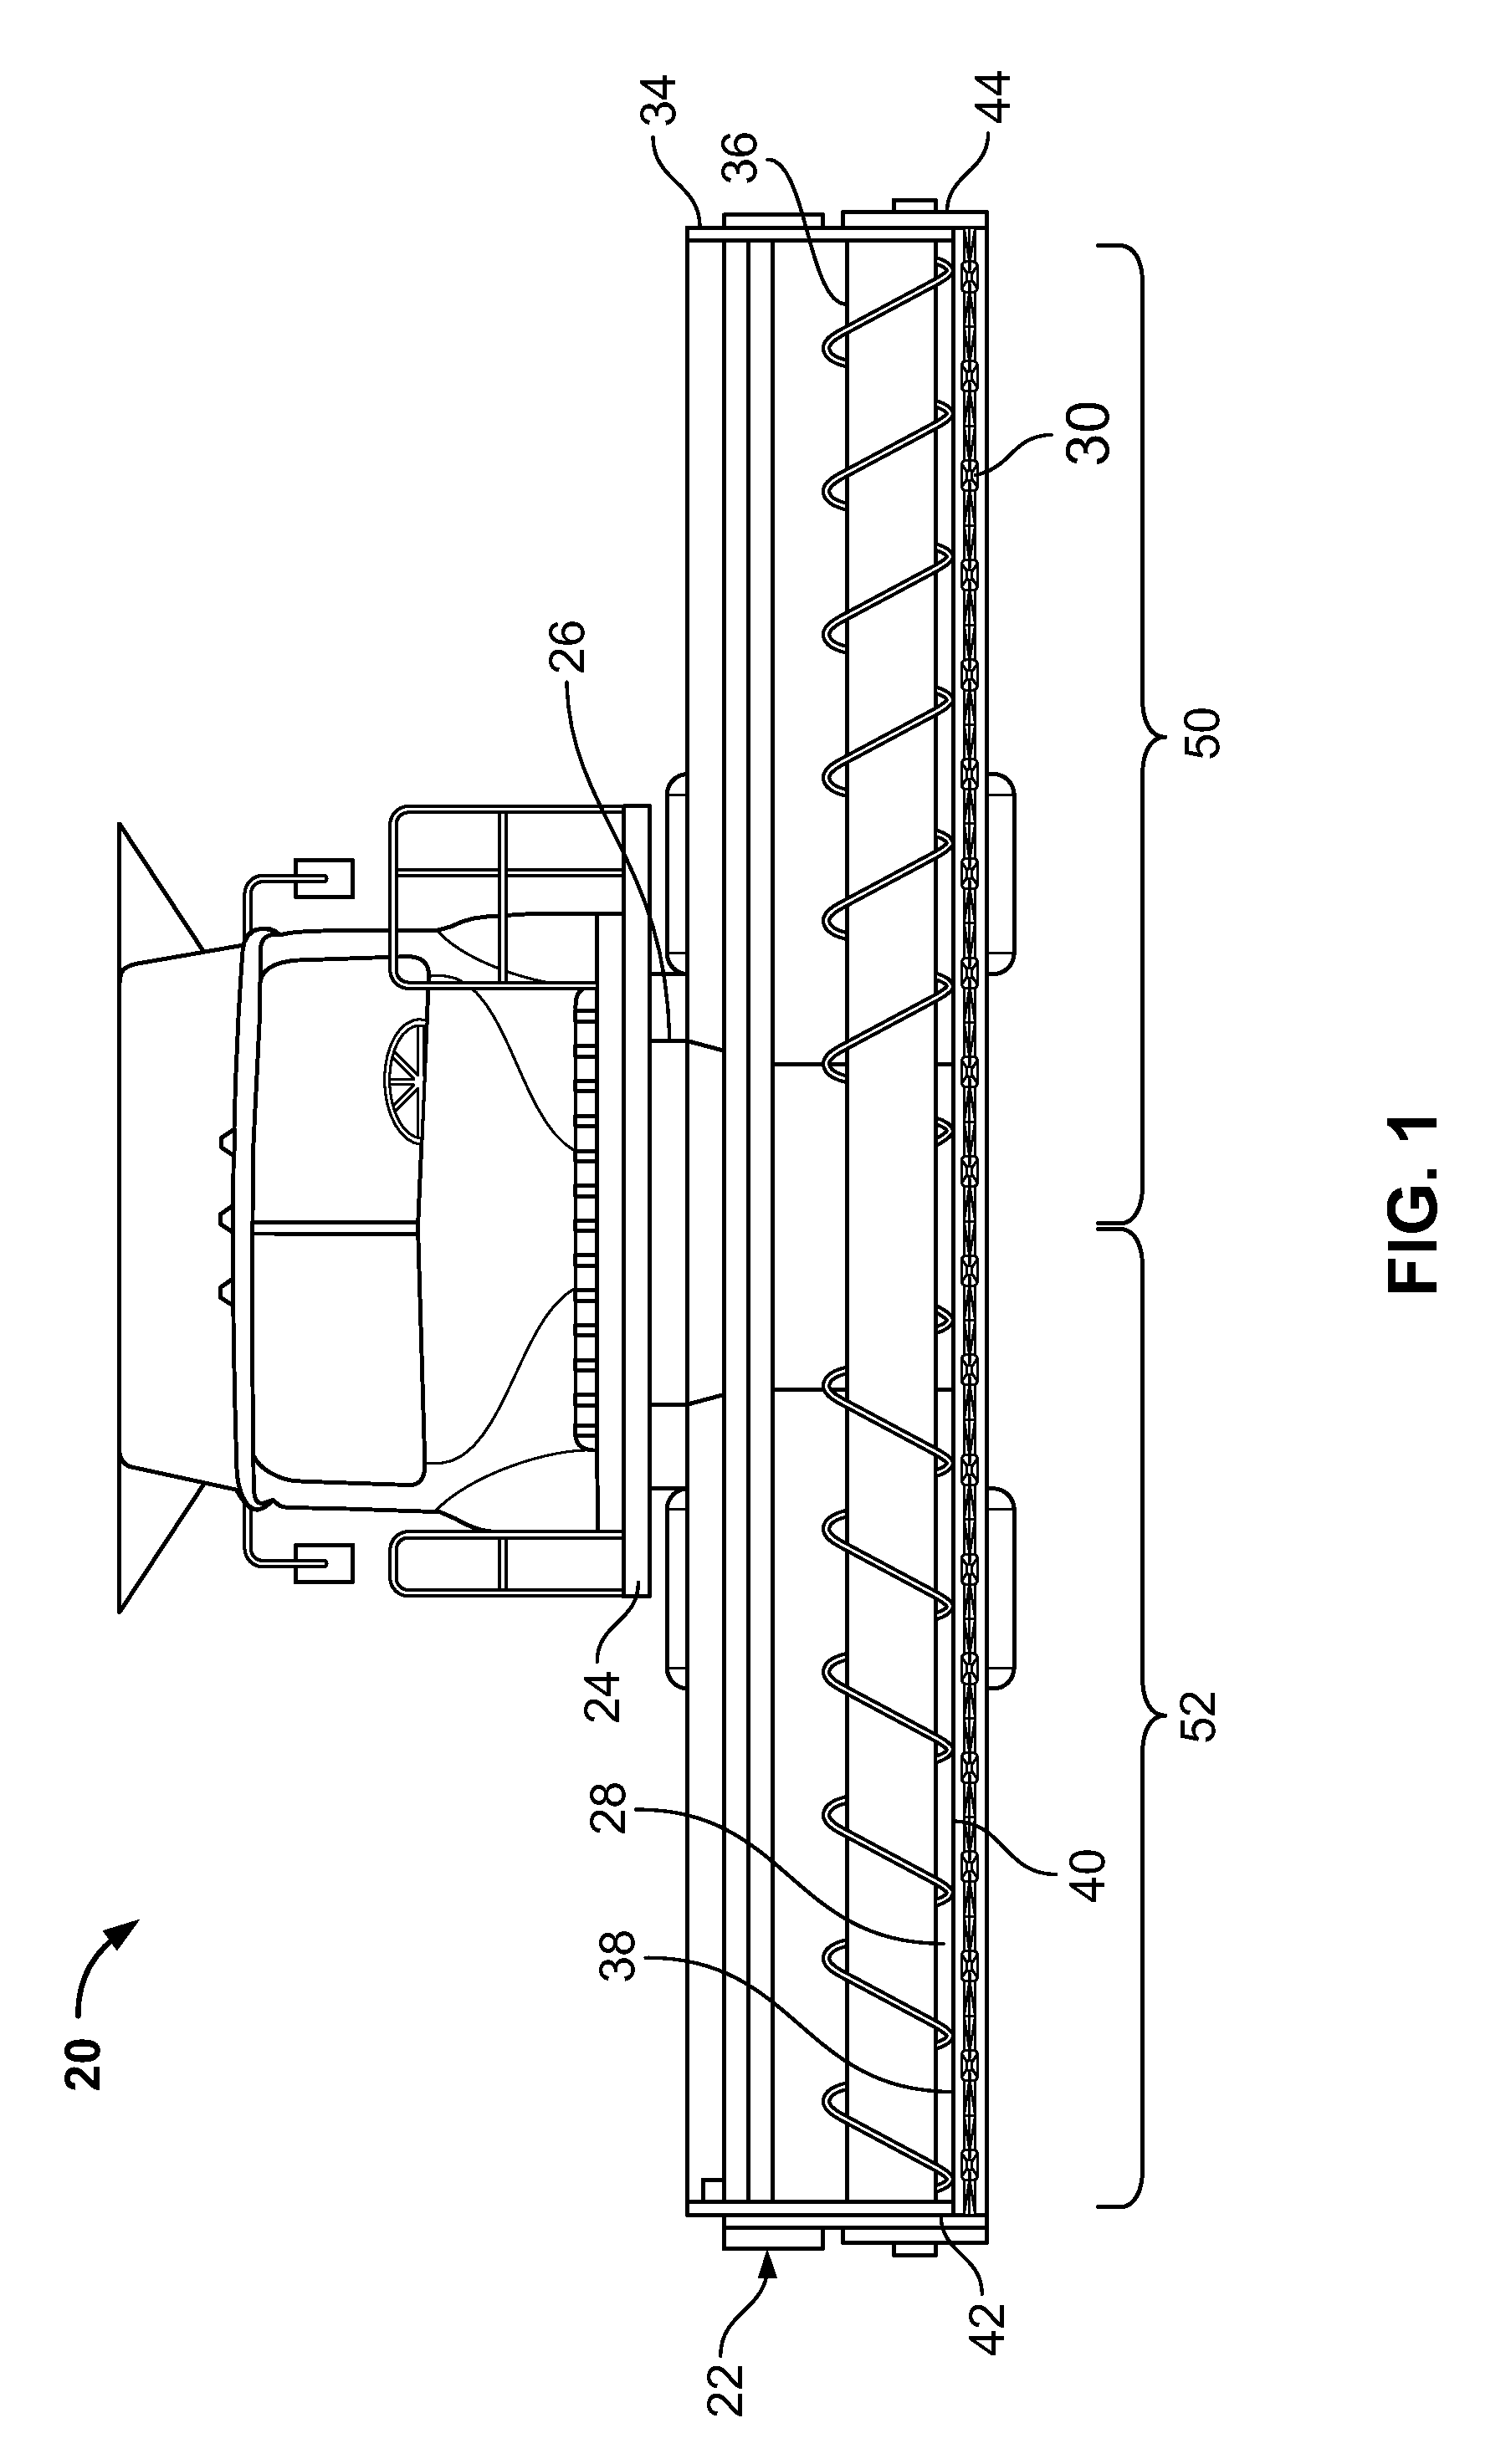 Blade assembly removal from a header of a plant cutting machine